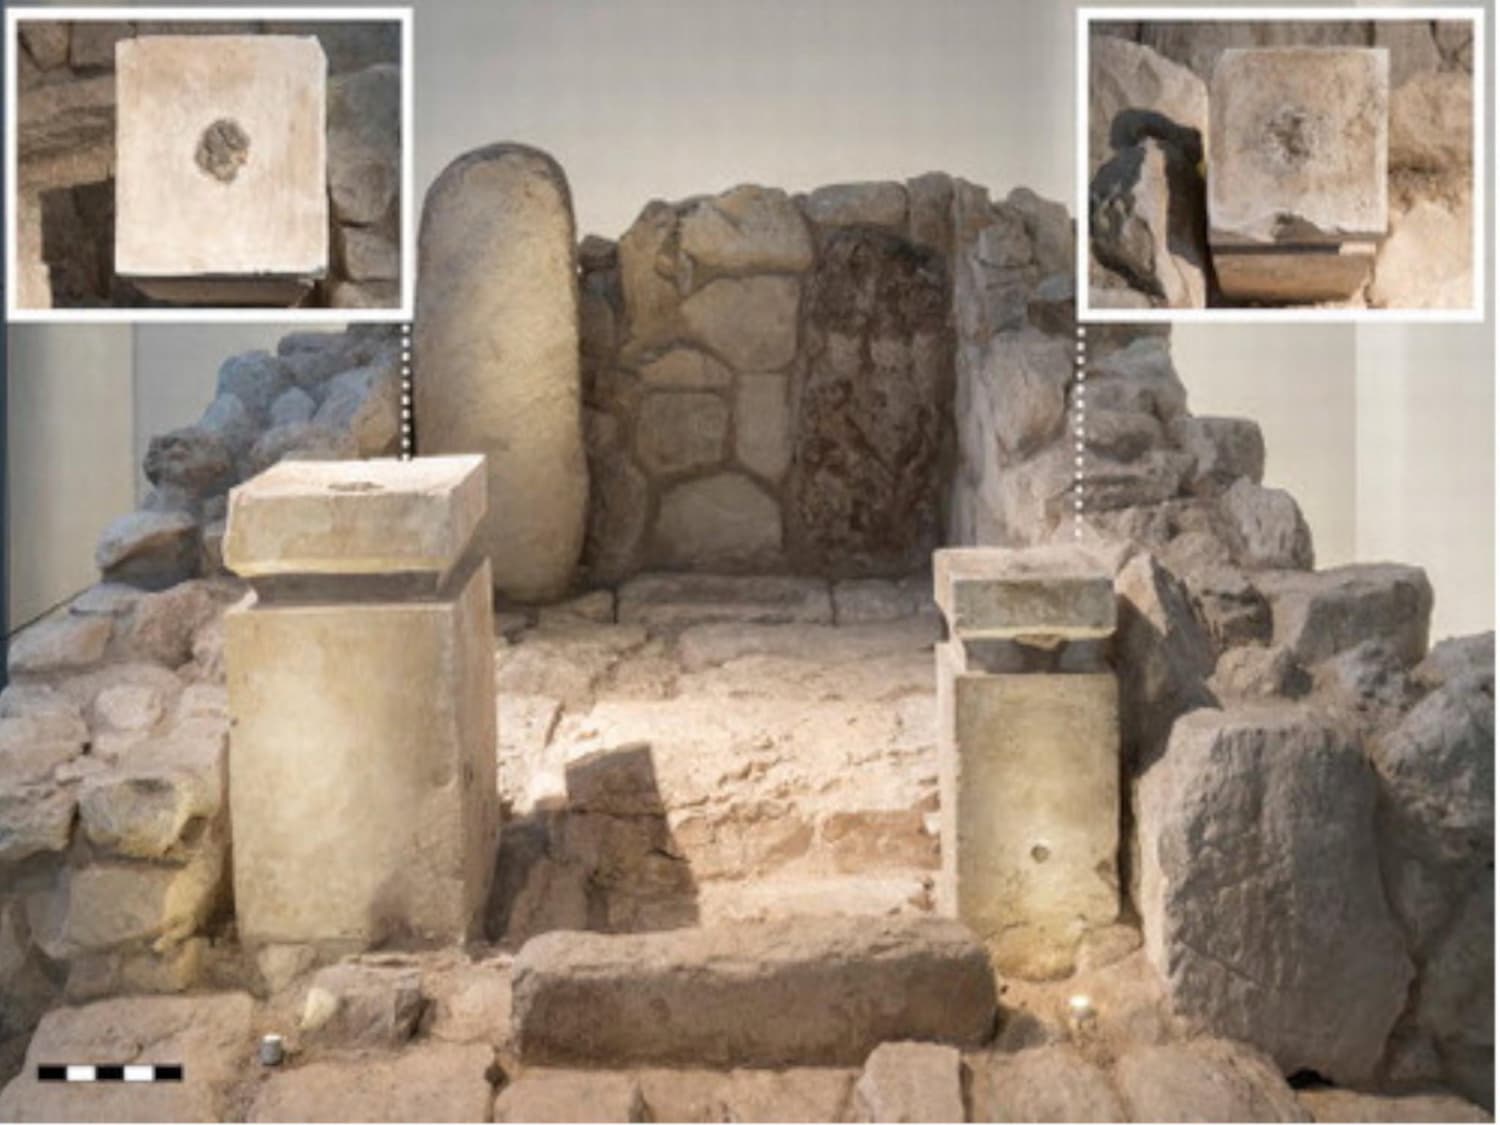 Archaeologists Identify Traces of Burnt Cannabis in Ancient Jewish Shrine